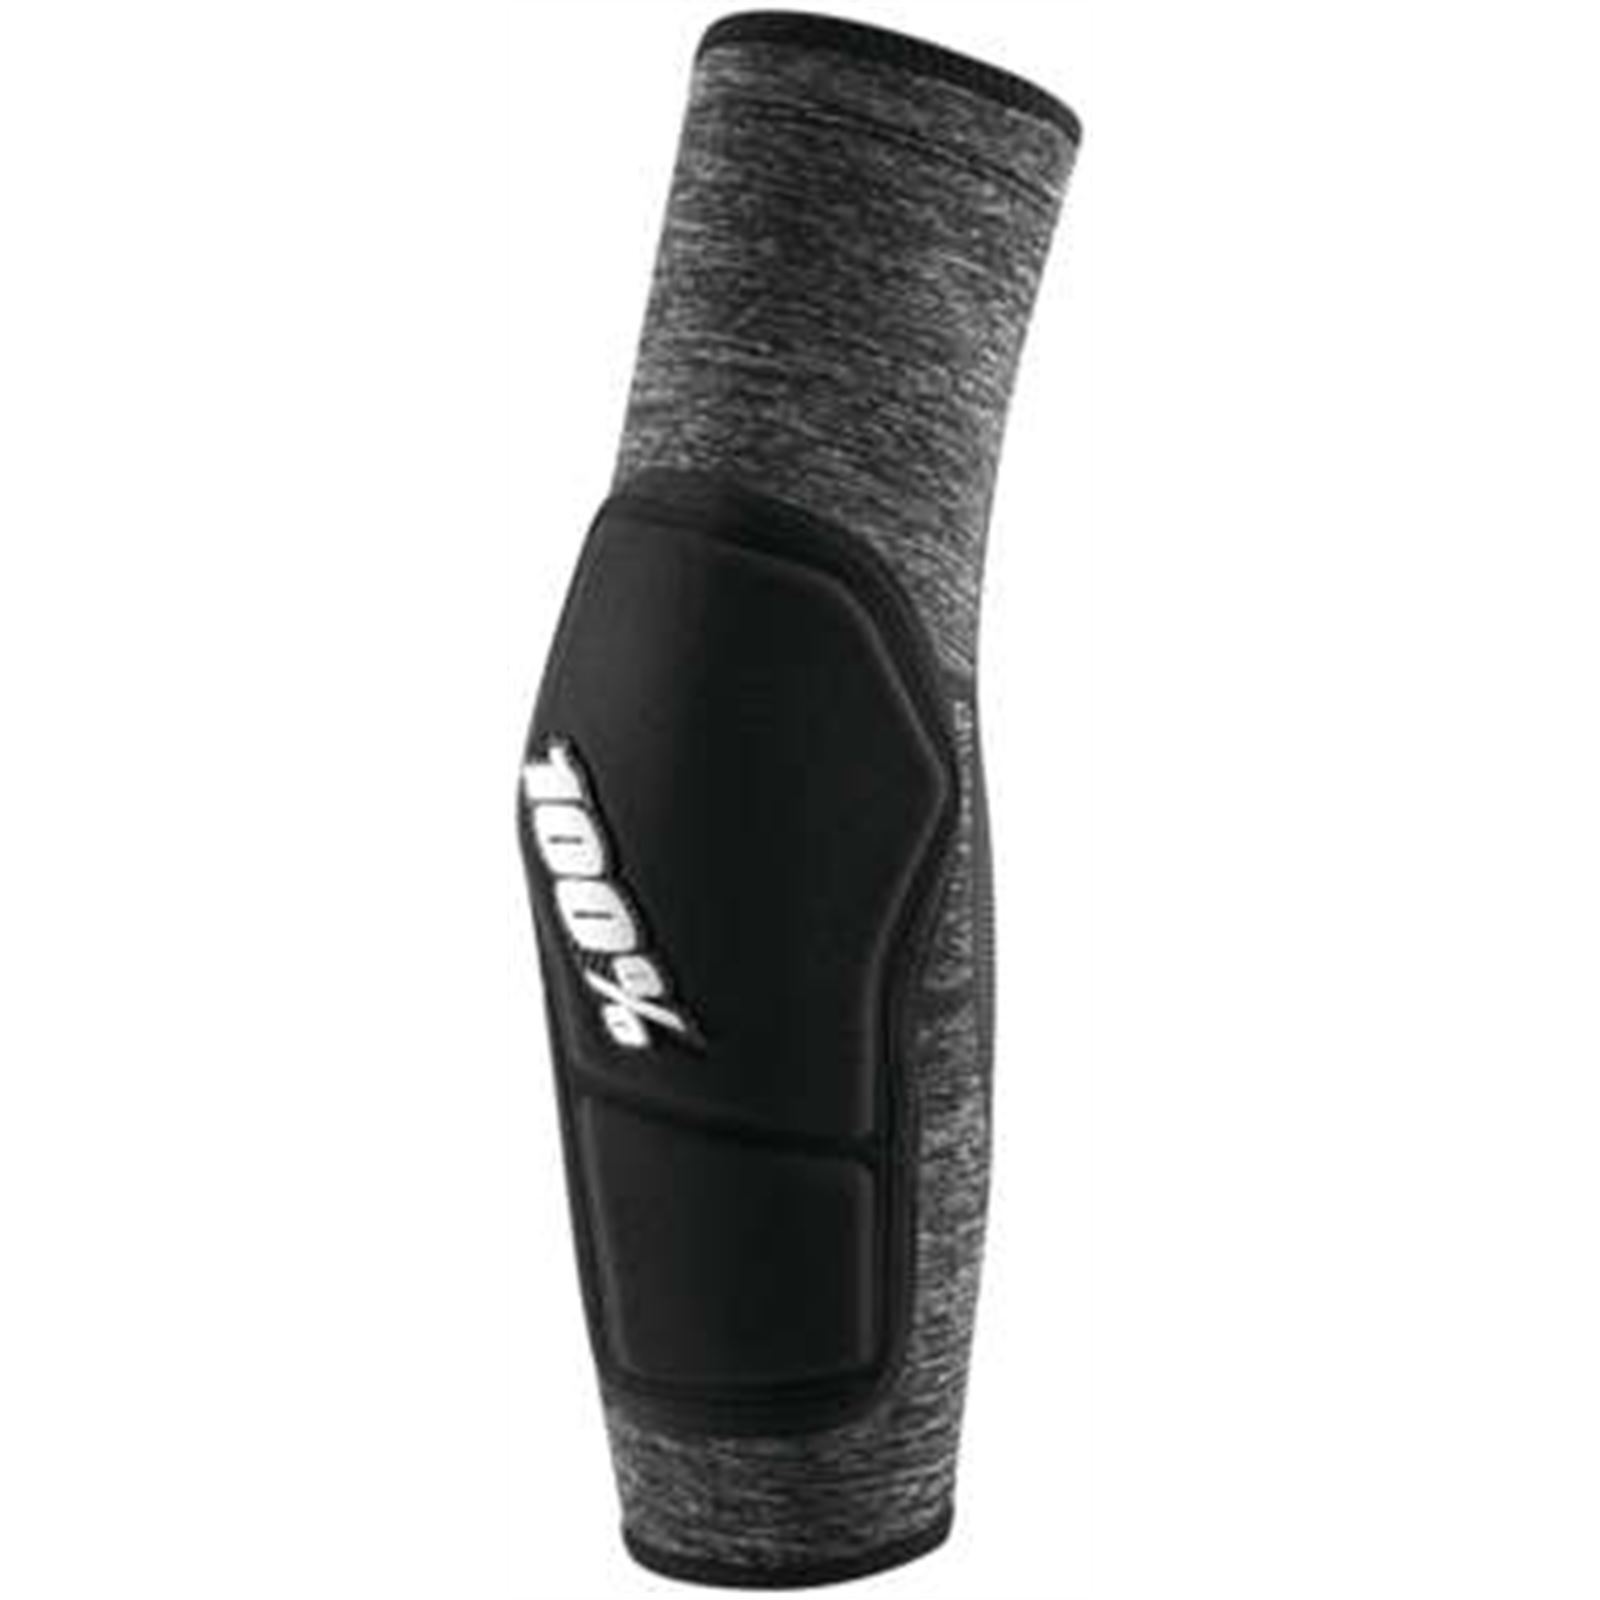 100% Ridecamp Elbow Grd Gryblk Sm - Click Image to Close